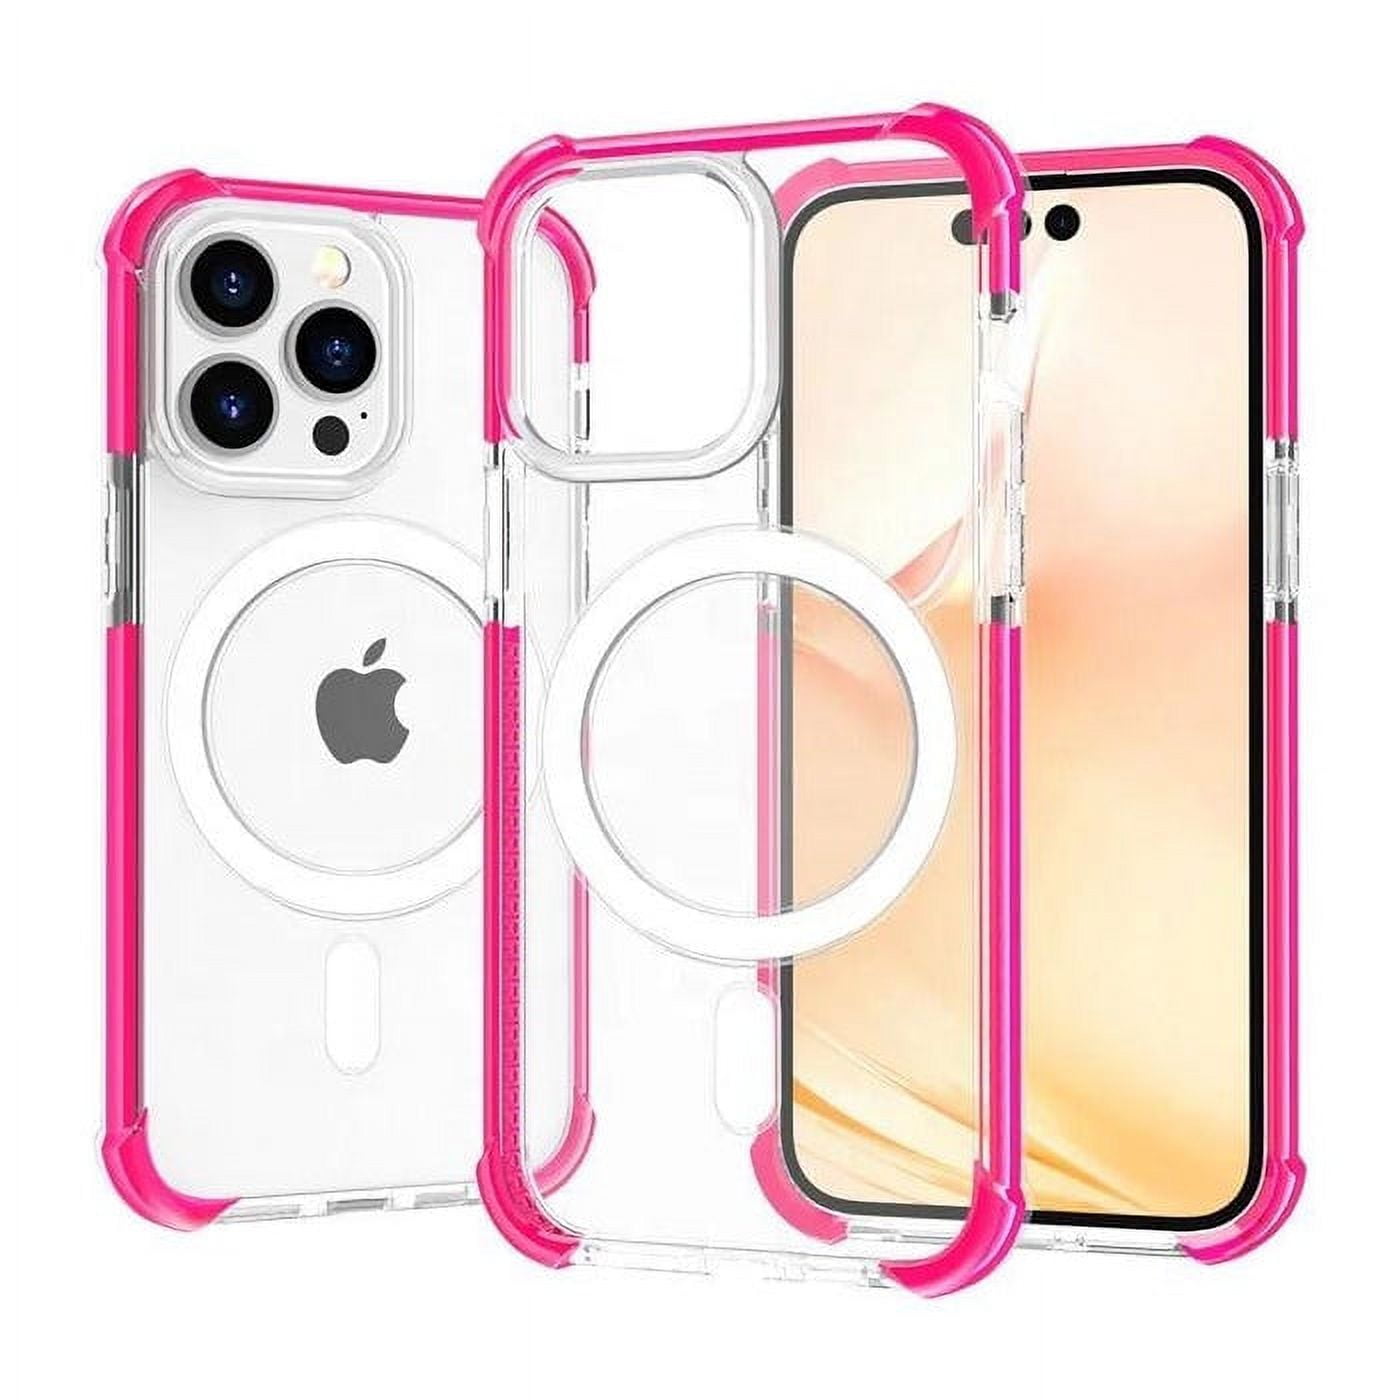 Apple iPhone 15 Pro Max Silicone Case with MagSafe - Light Pink ​​​​​​​